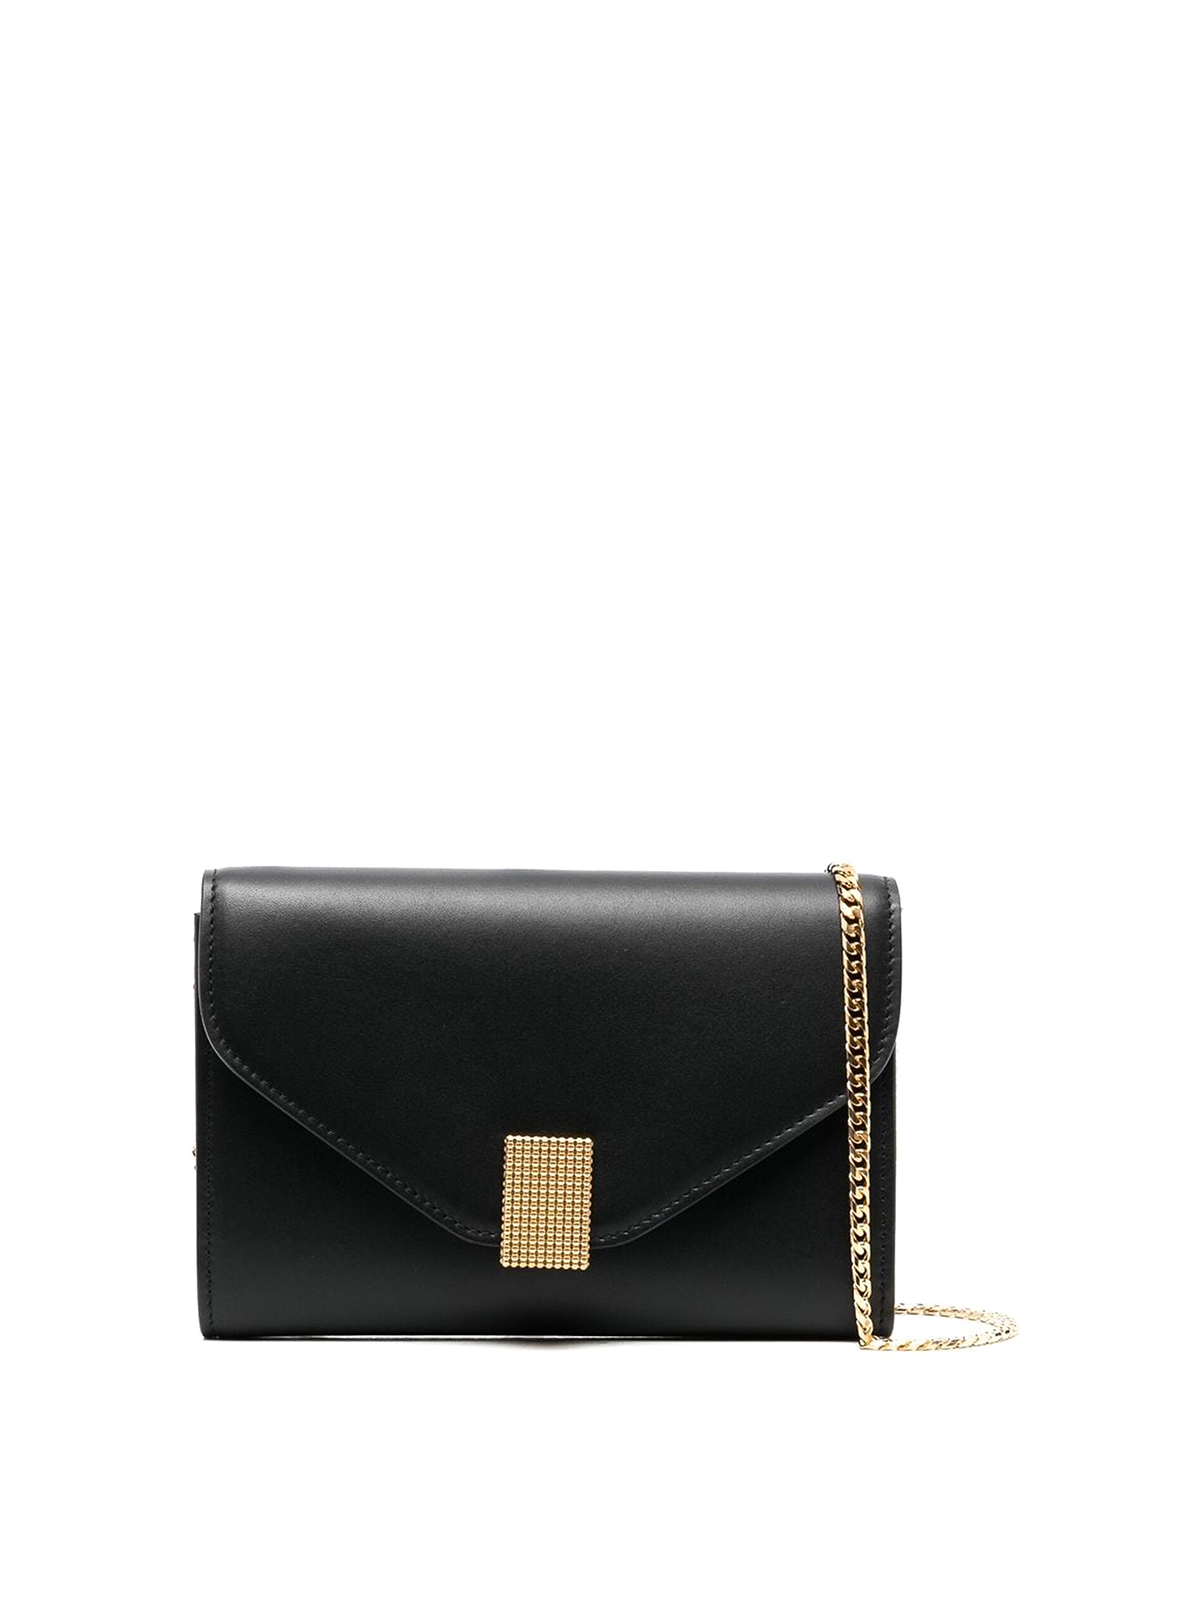 Lanvin Leather Bag With Gold-tone Hardware In Black